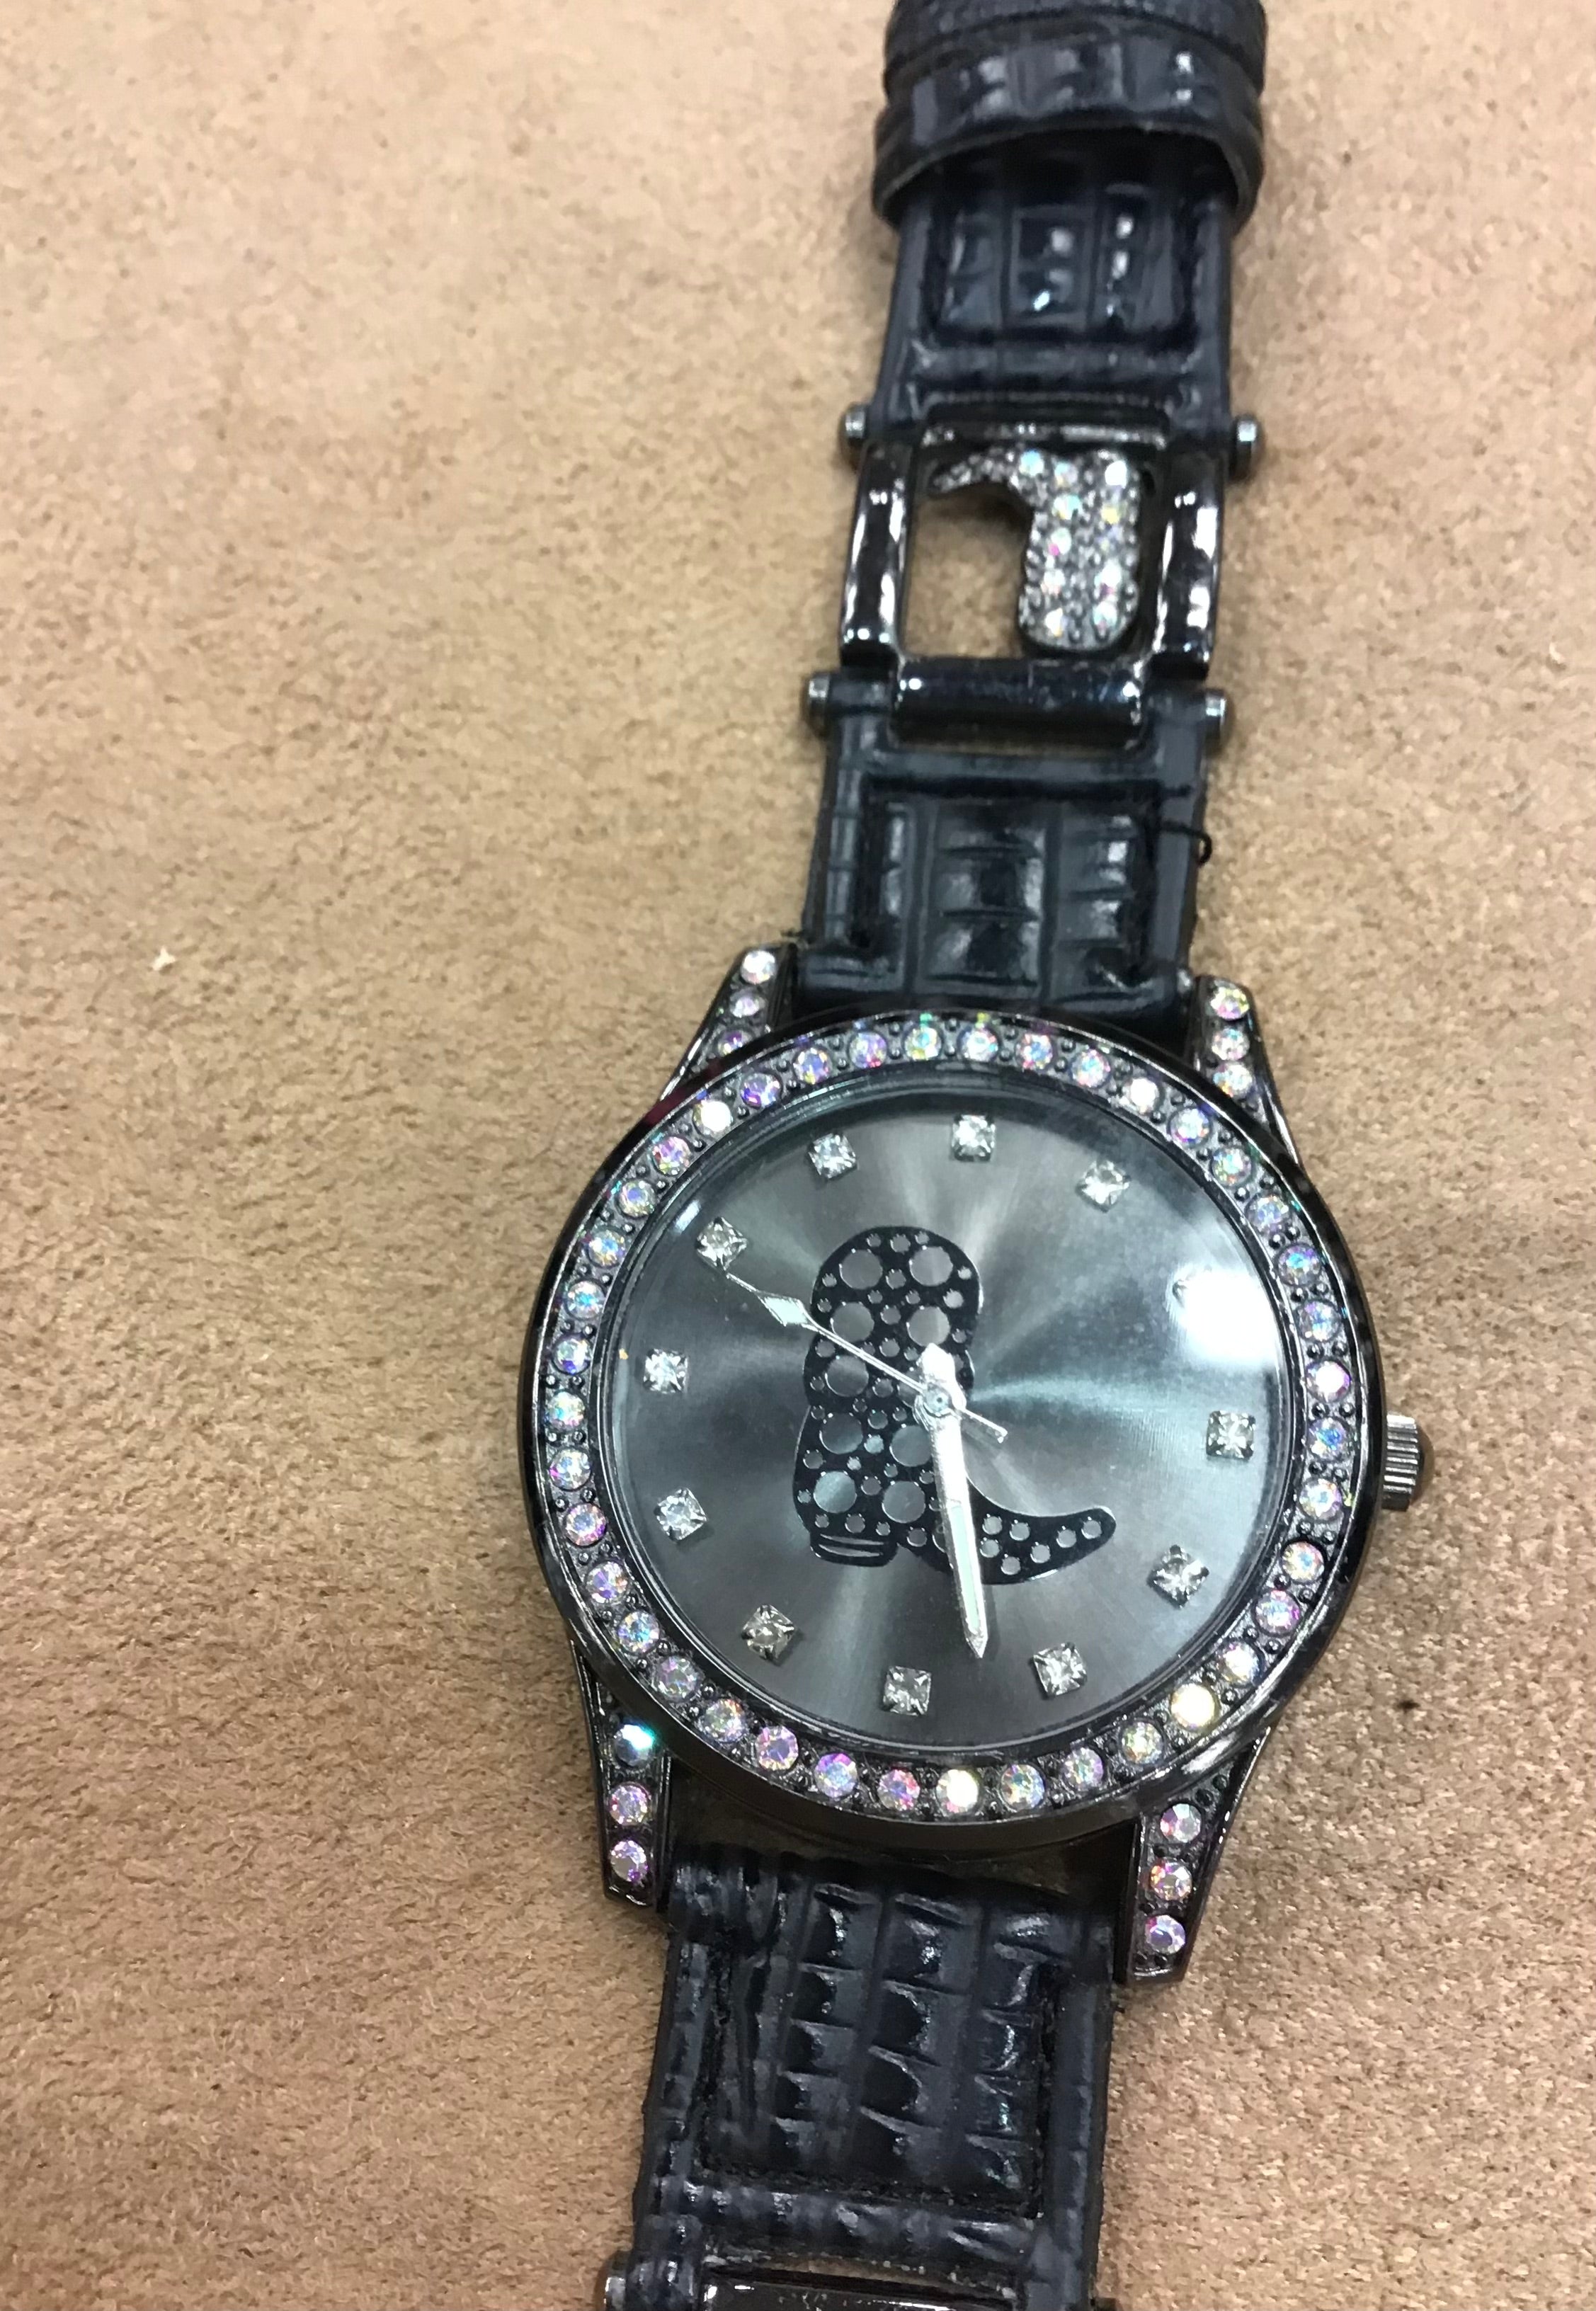 Western Style Watch With Boots & Bling